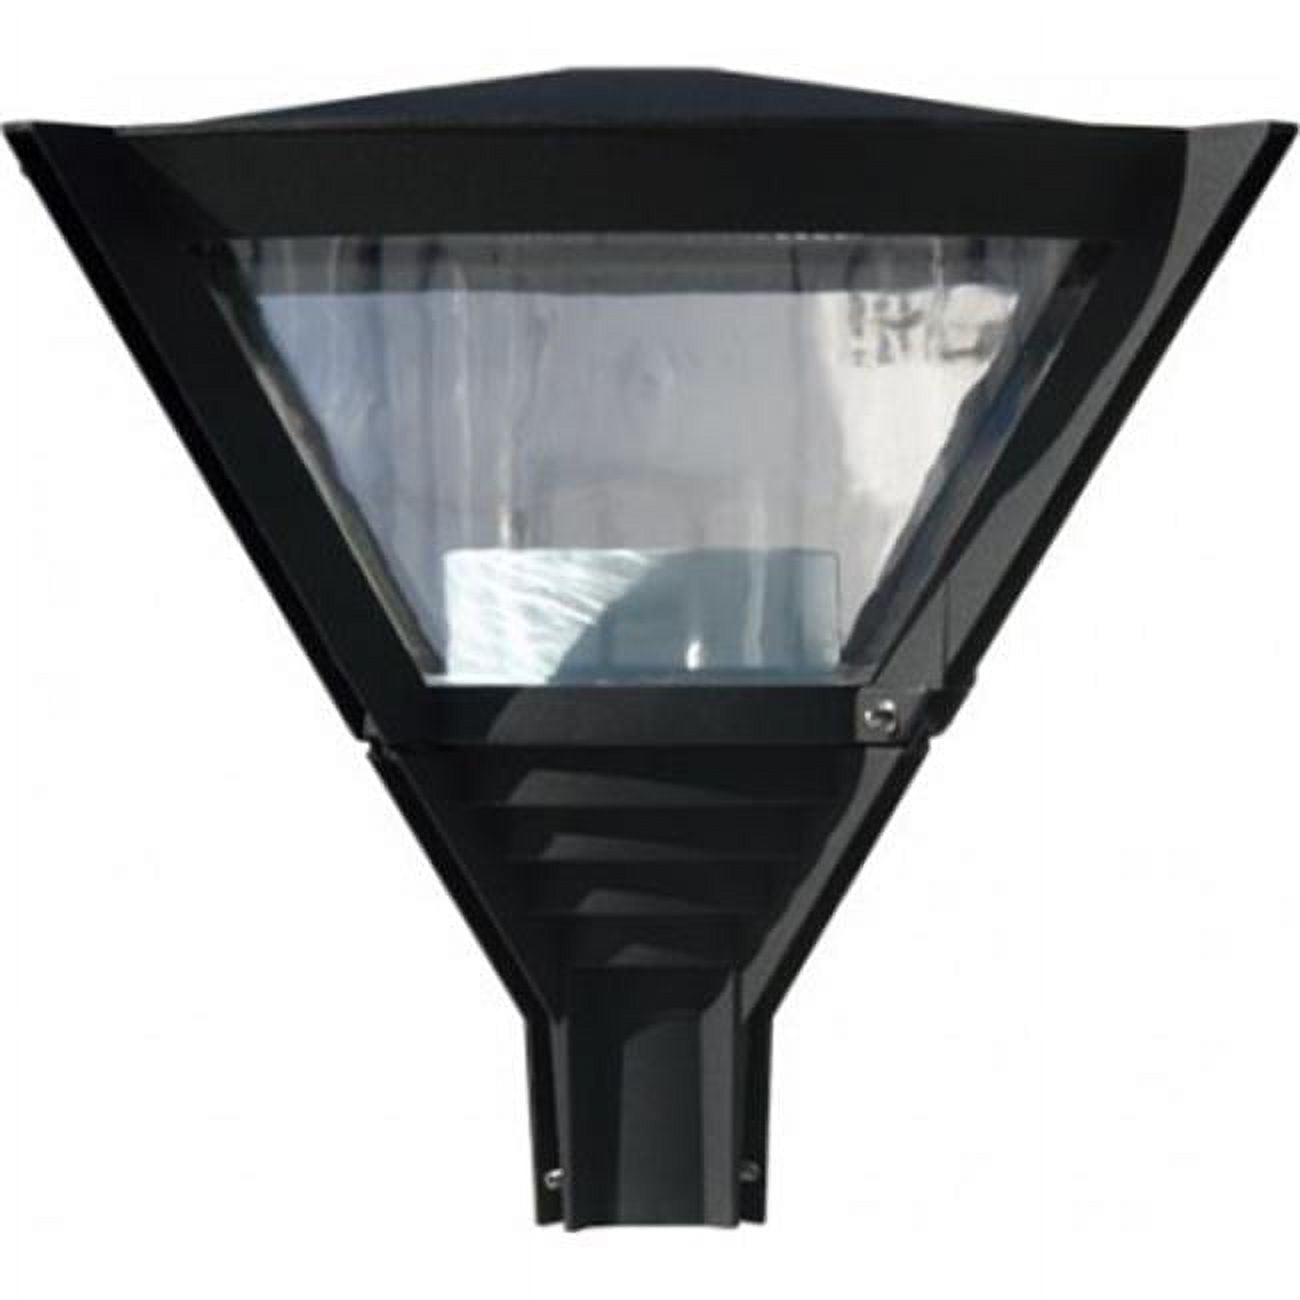 Picture of Dabmar Lighting GM565-B Powder Coated Cast Aluminum Architectural Post Top Light Fixture, Black - 20.75 x 20.75 x 20.75 in.